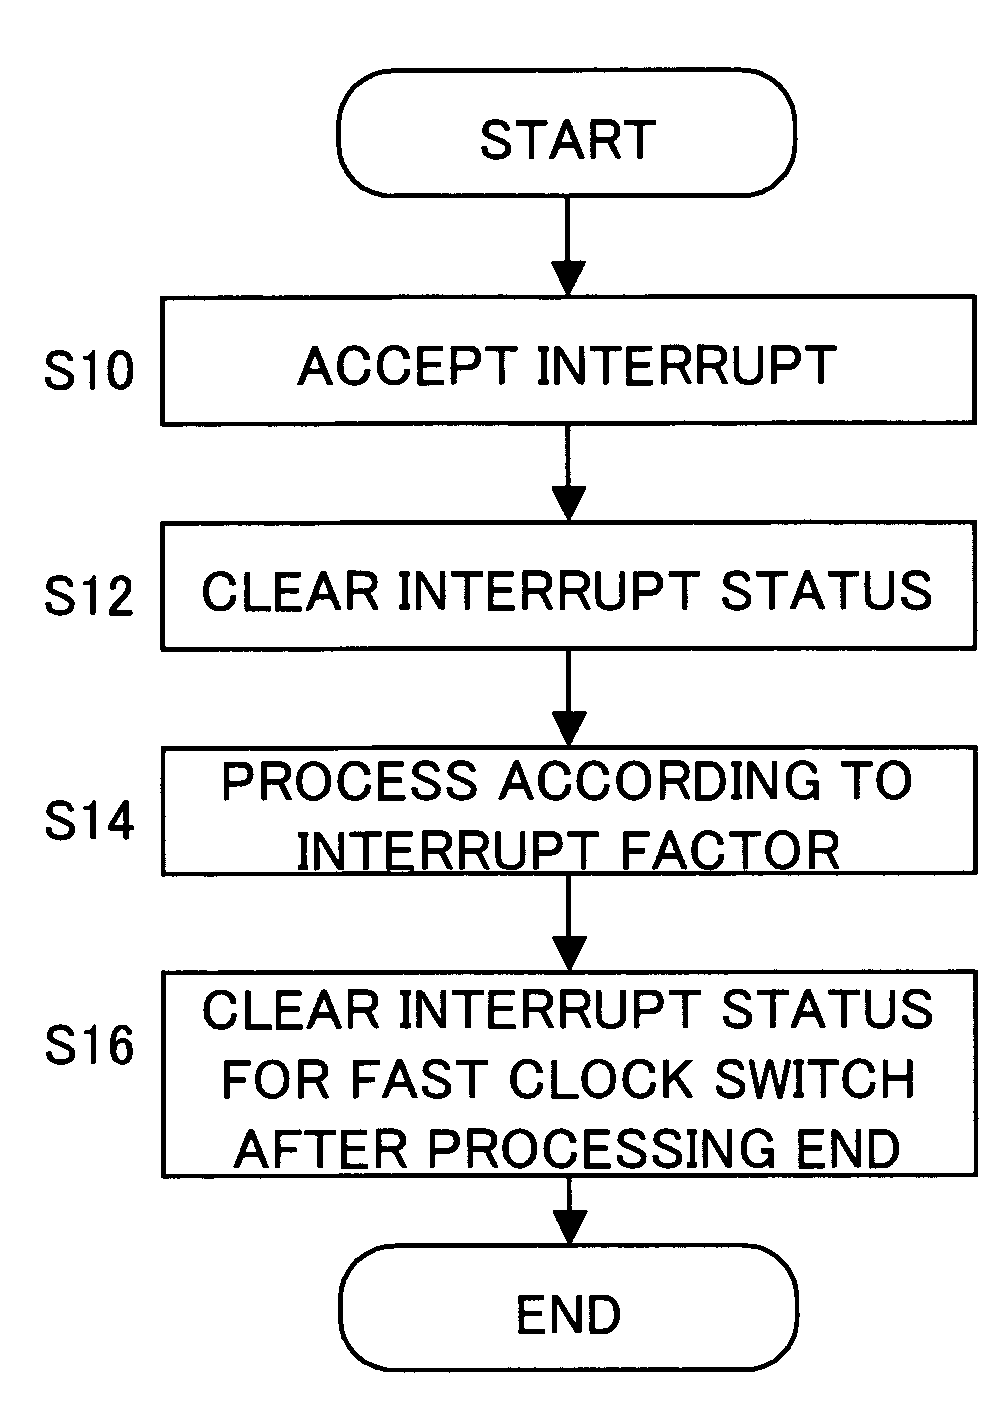 Information processing apparatus and media storage apparatus using the same